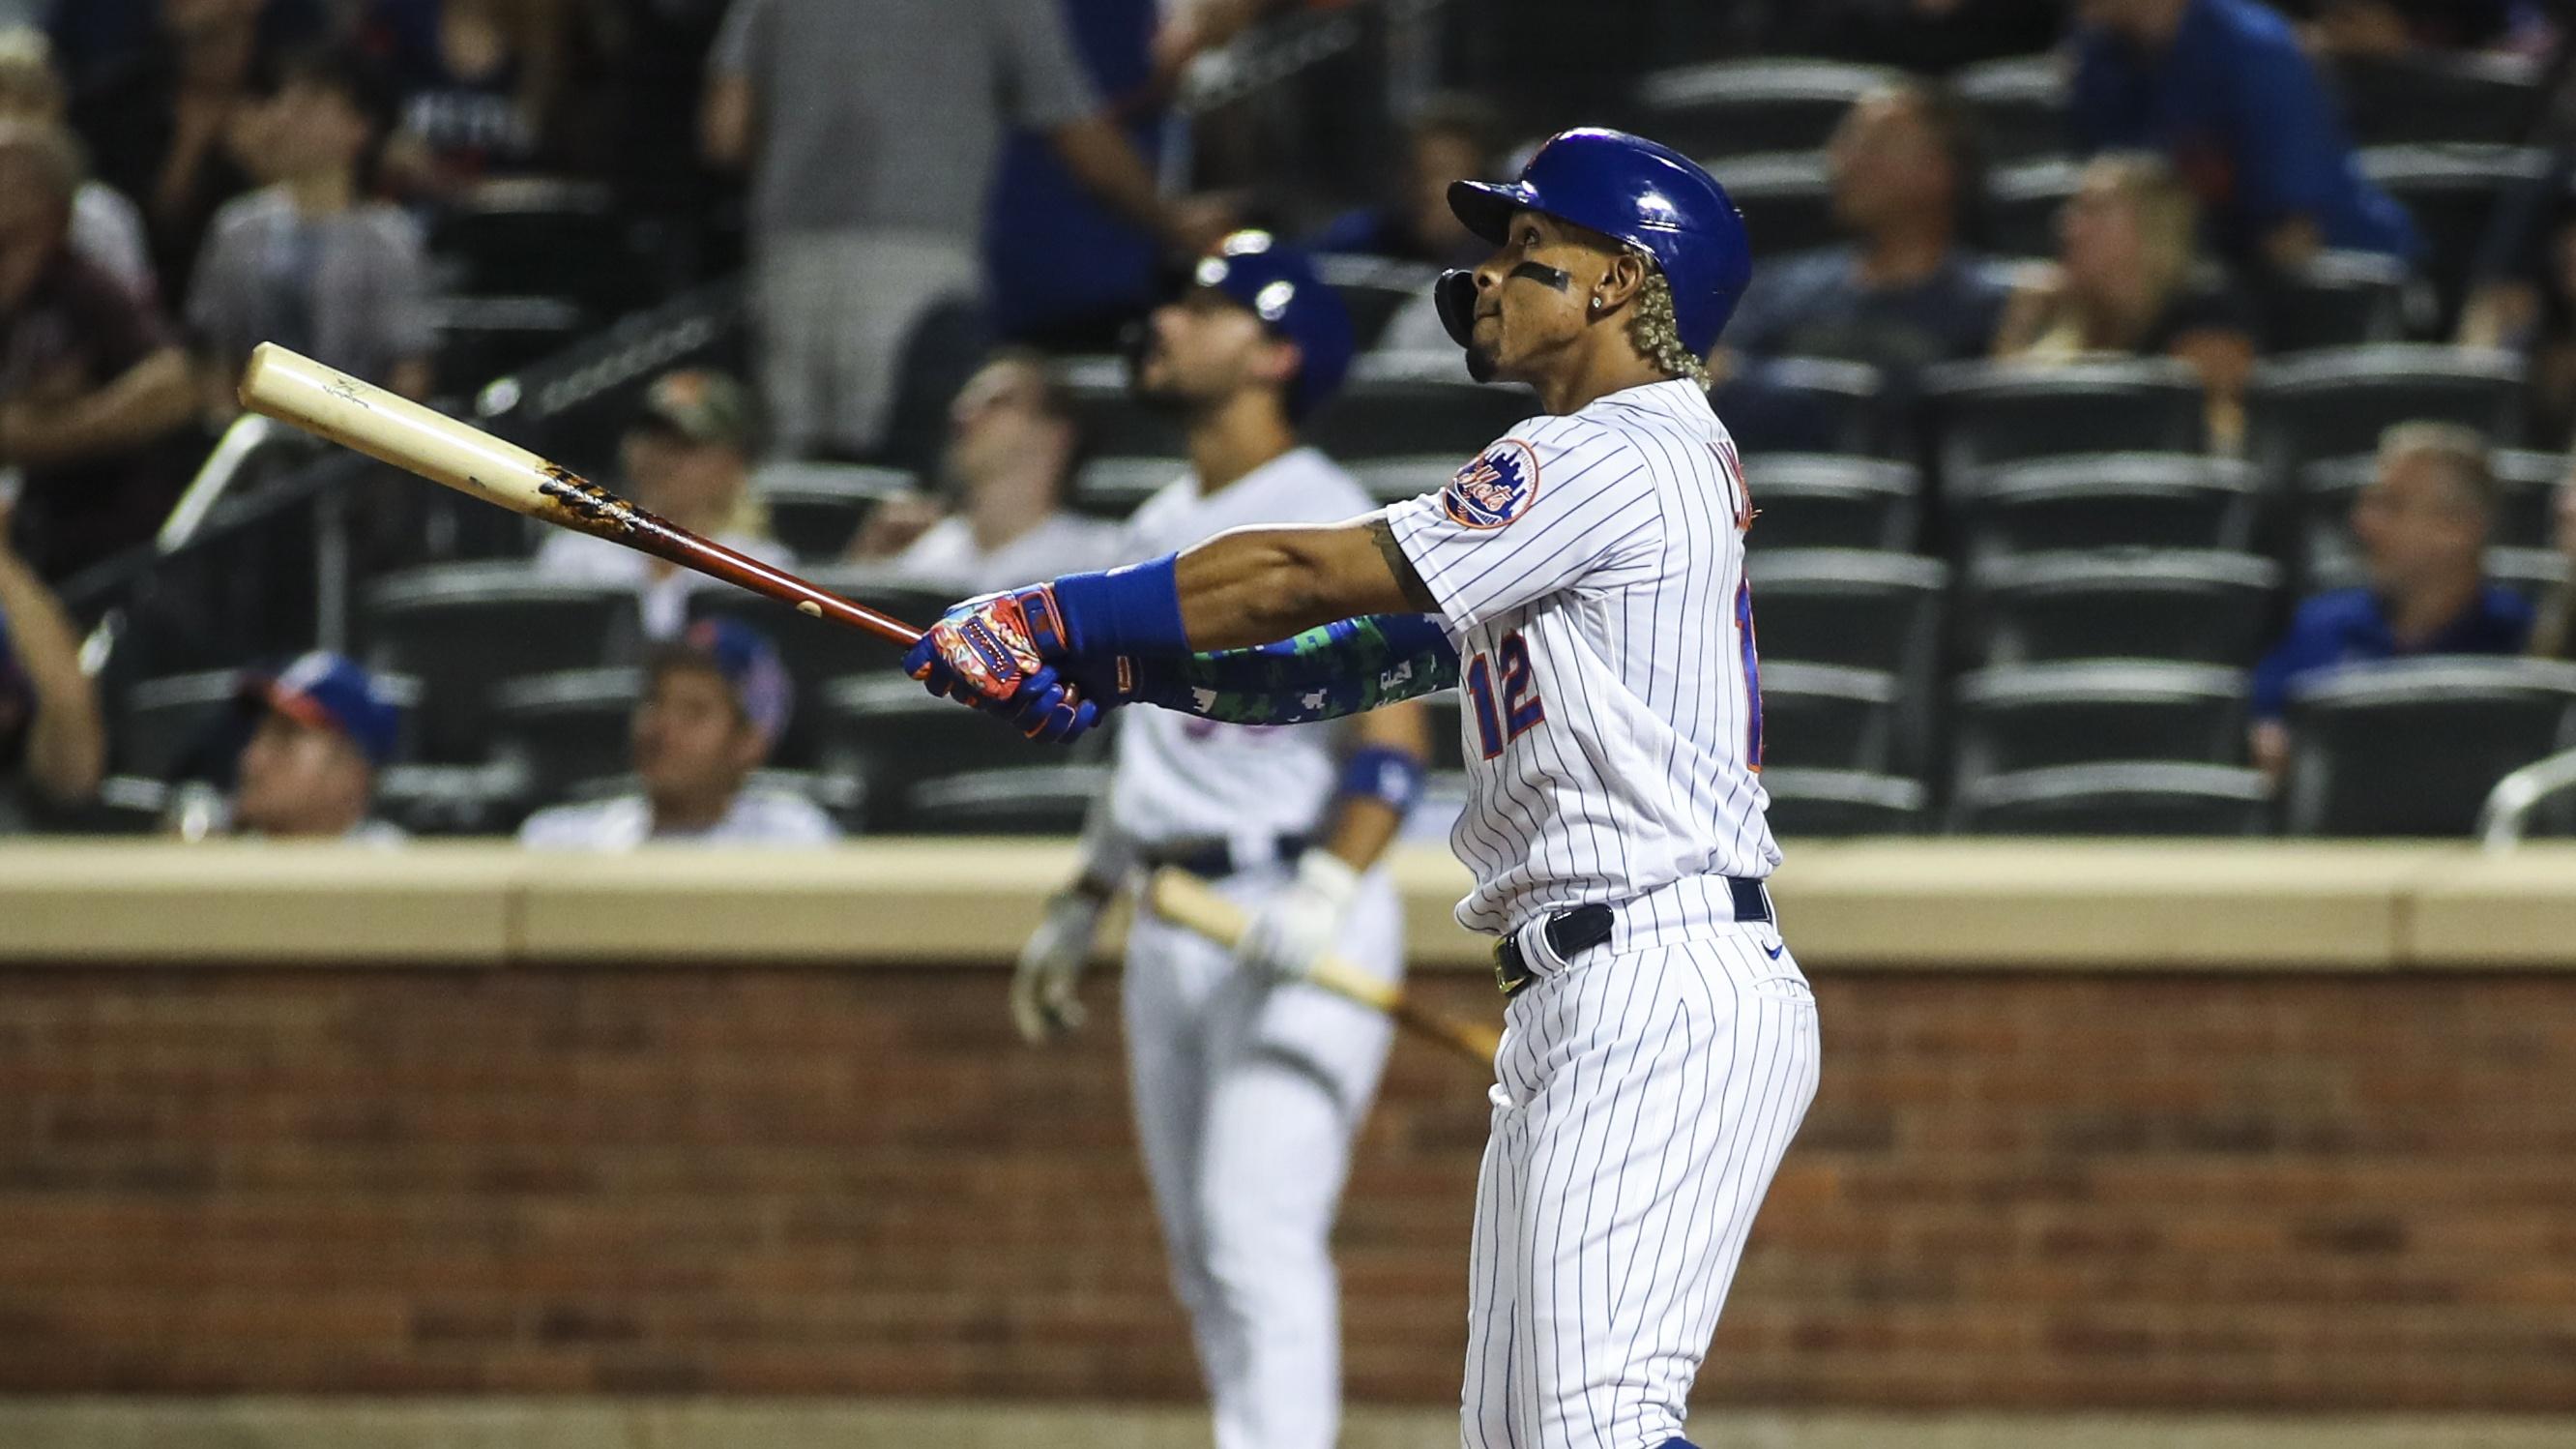 Sep 12, 2021; New York City, New York, USA; New York Mets shortstop Francisco Lindor (12) watches after hitting a three run home run in the second inning against the New York Yankees at Citi Field. / © Wendell Cruz-USA TODAY Sports